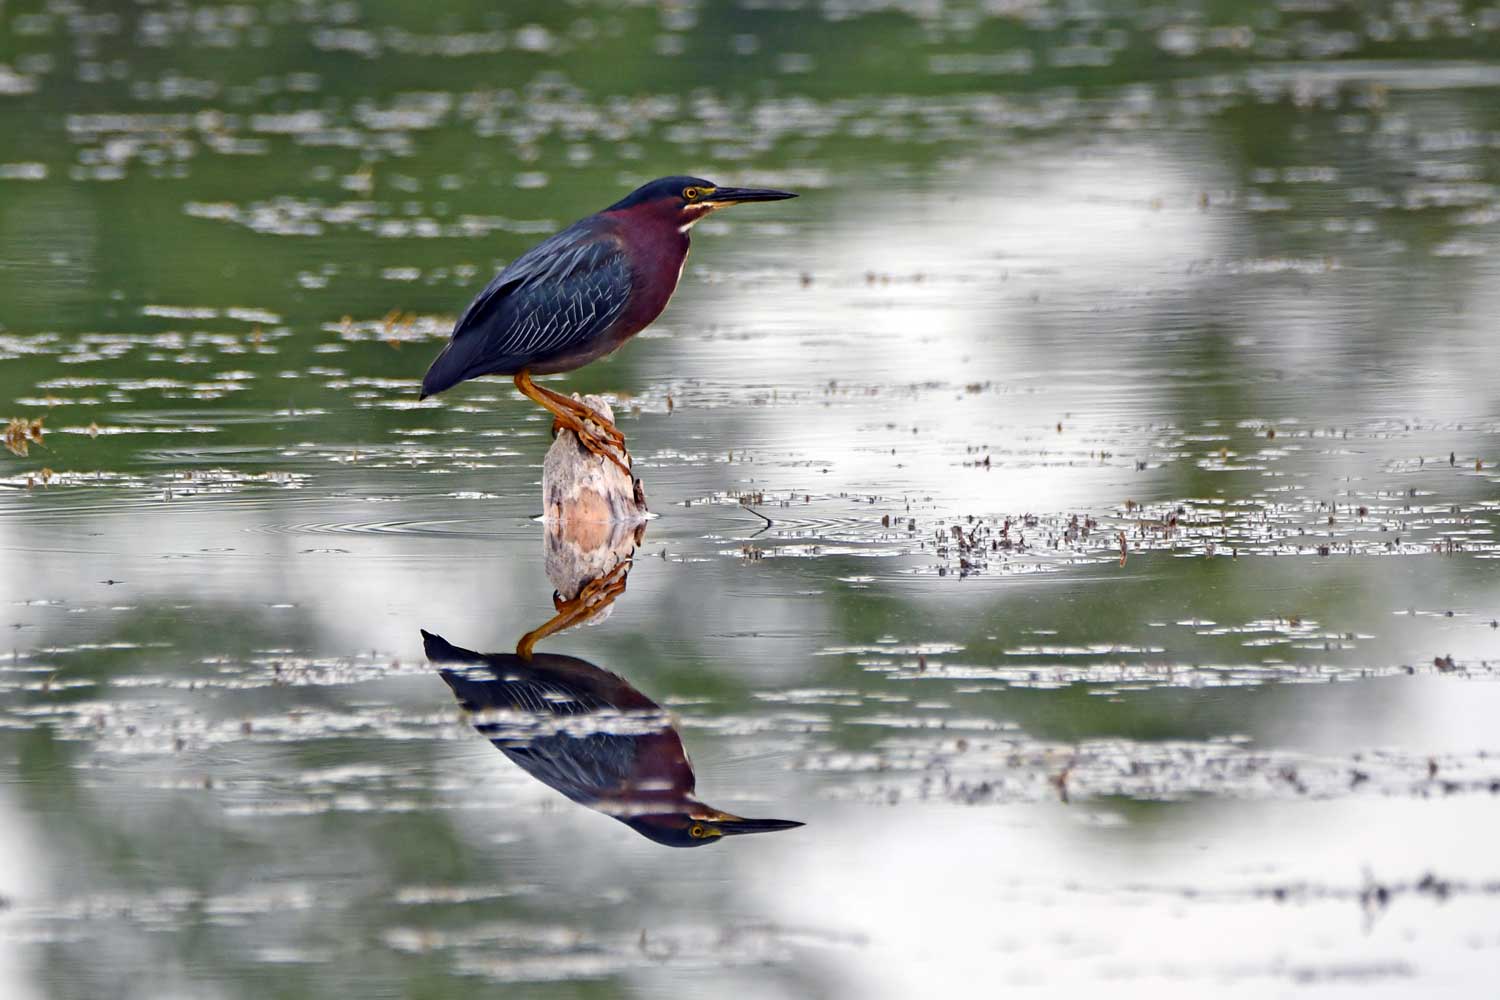 A green heron perched on a branch sticking out of the water reflected on the calm surface.